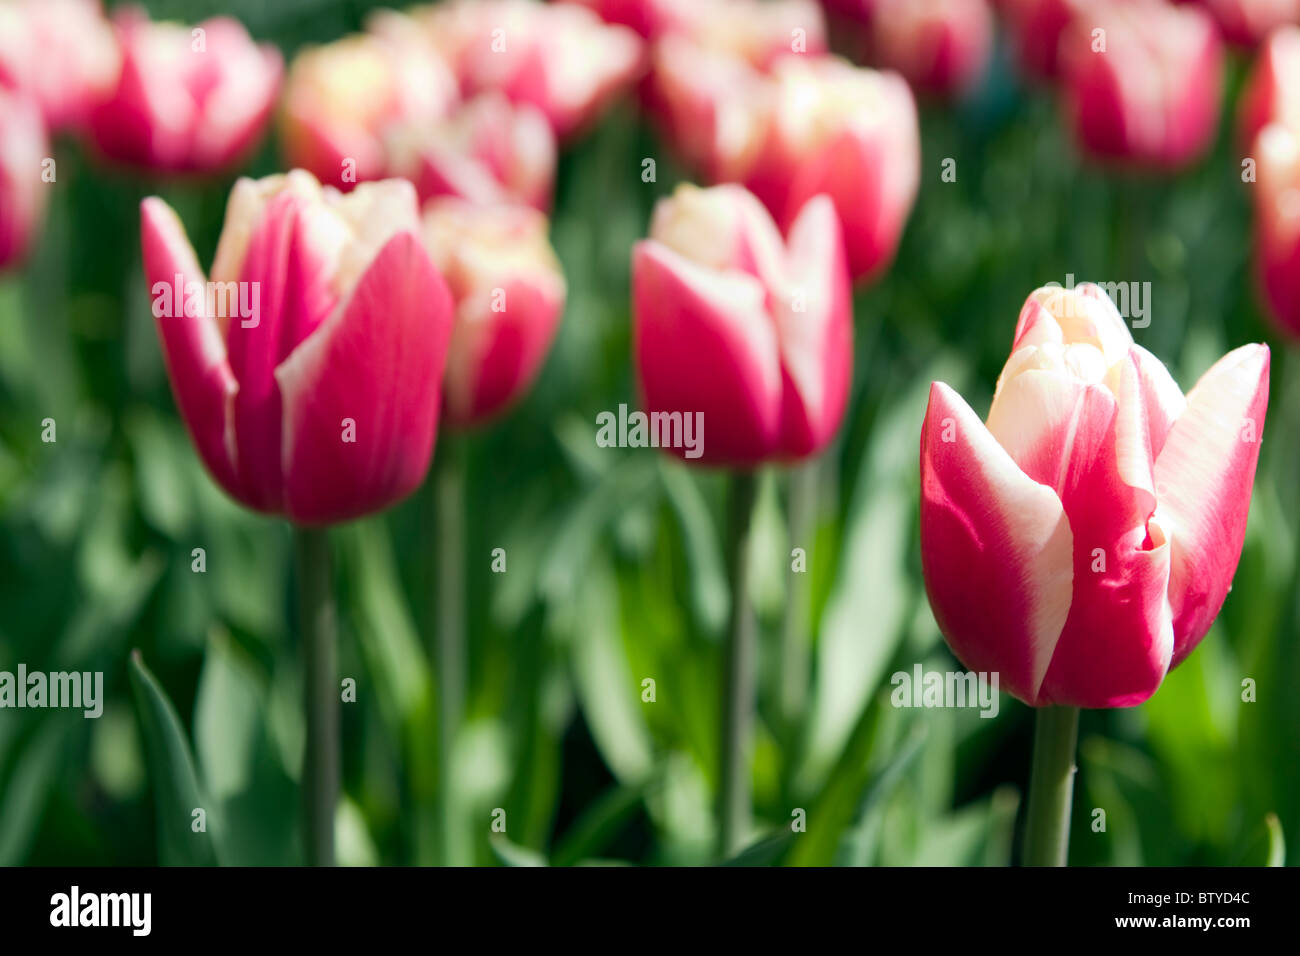 Wirosa tulips in the Keukenhof at Lisse the Netherlands. Type of flower: Double Late tulip Name: Wirosa Stock Photo